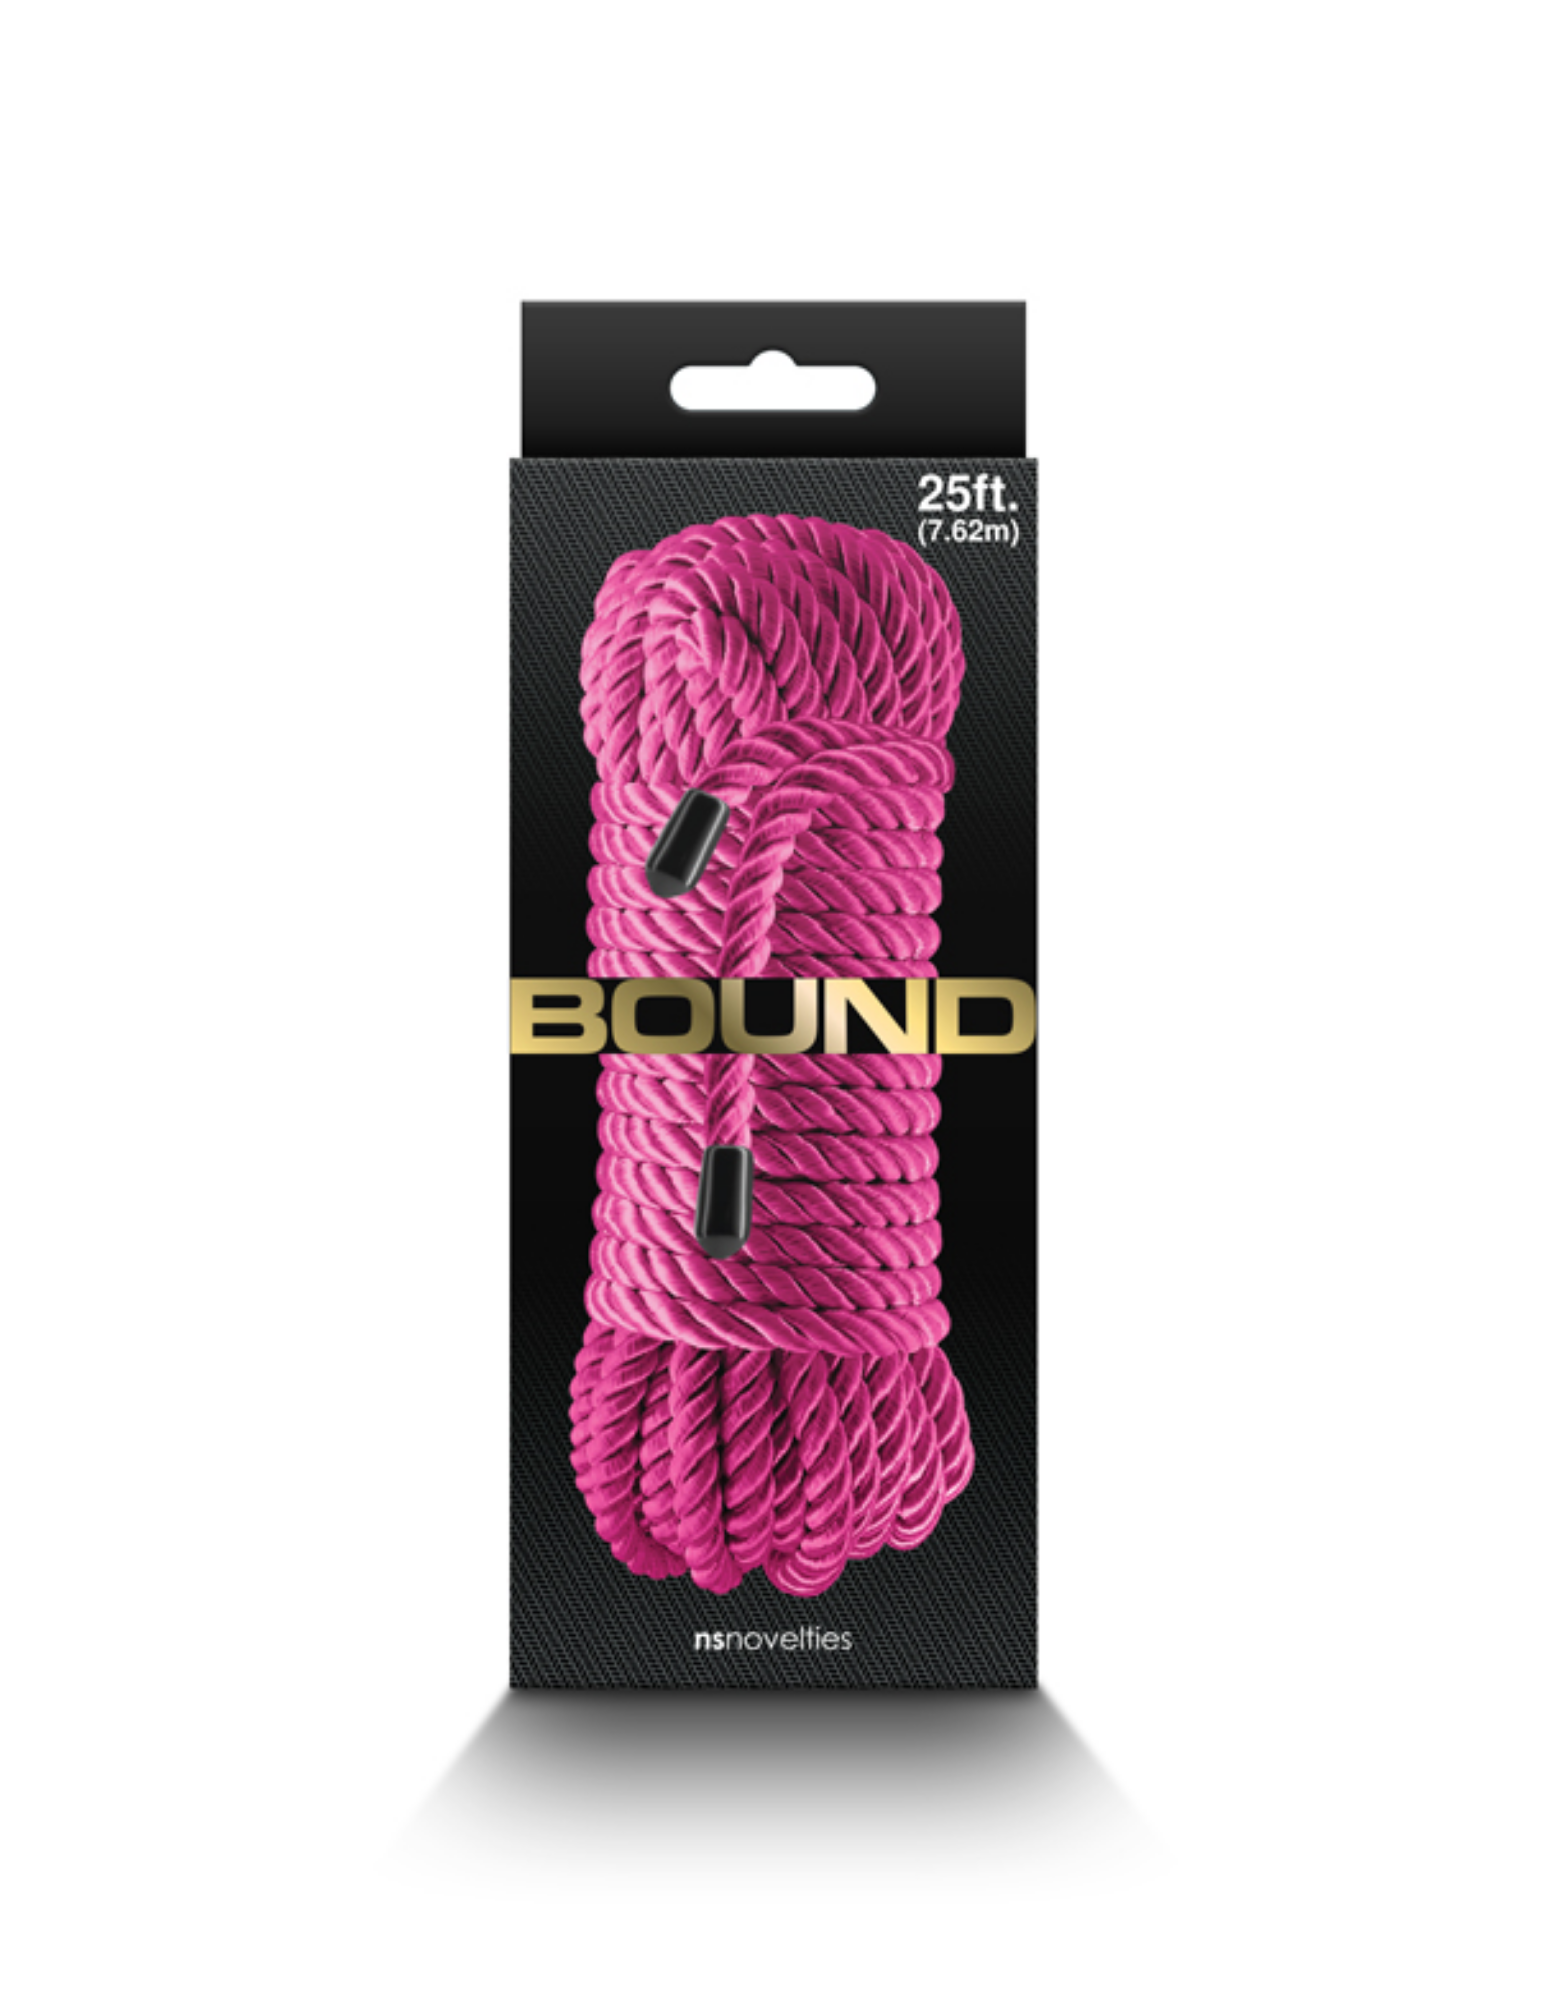 Photo of the box for the Bound Rope from NS Novelties (pink).